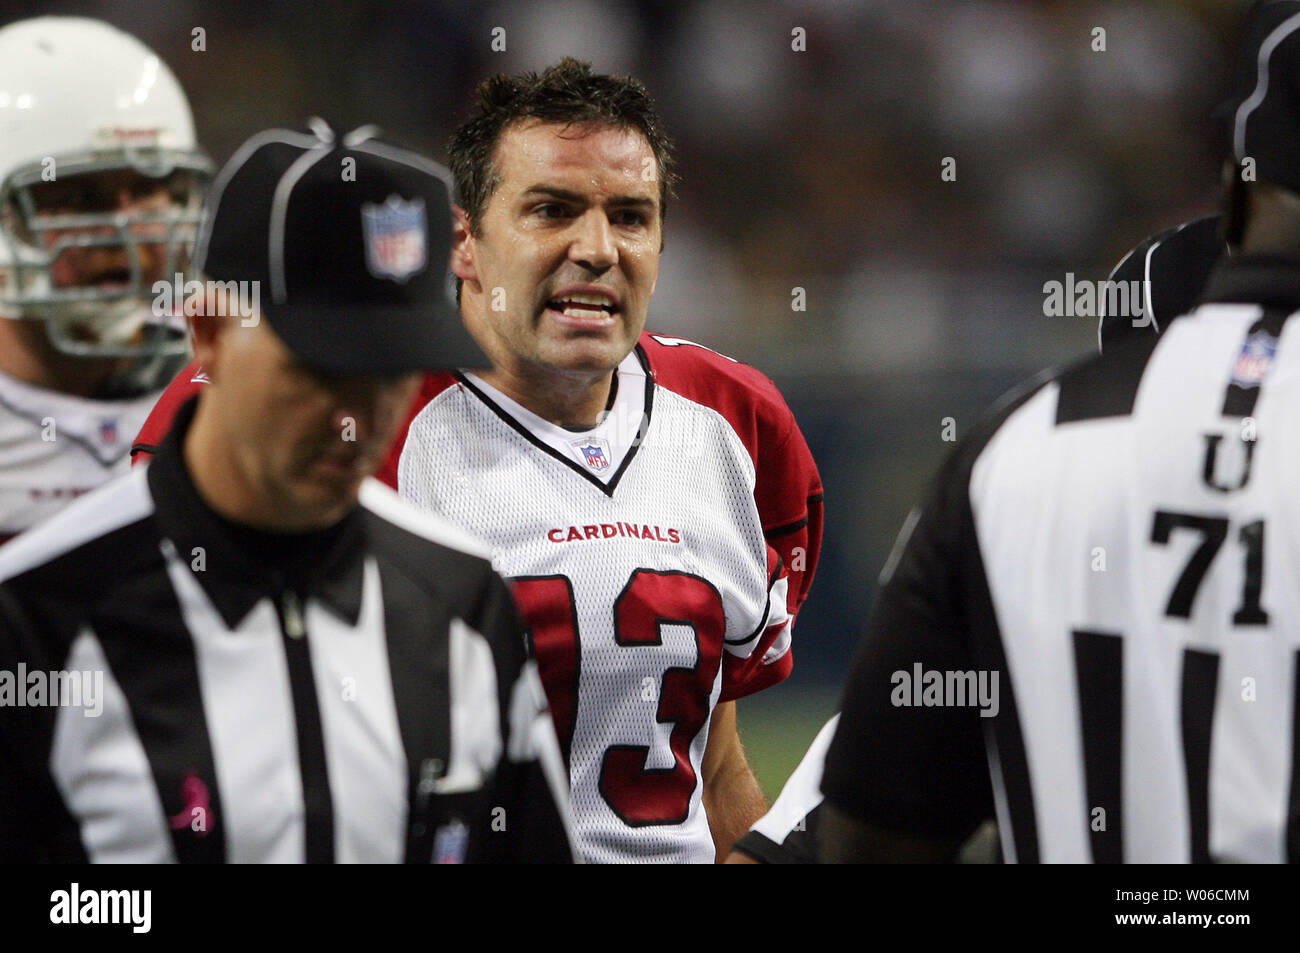 Arizona Cardinals quarterback Kurt Warner (C) argues with officials after a touchdown is being reviewed during the second quarter in a game against the St. Louis Rams at the Edward Jones Dome in St. Louis on October 7, 2007.Arizona was awarded the touchdown as they won the game 34-31.  (UPI Photo/Bill Greenblatt) Stock Photo